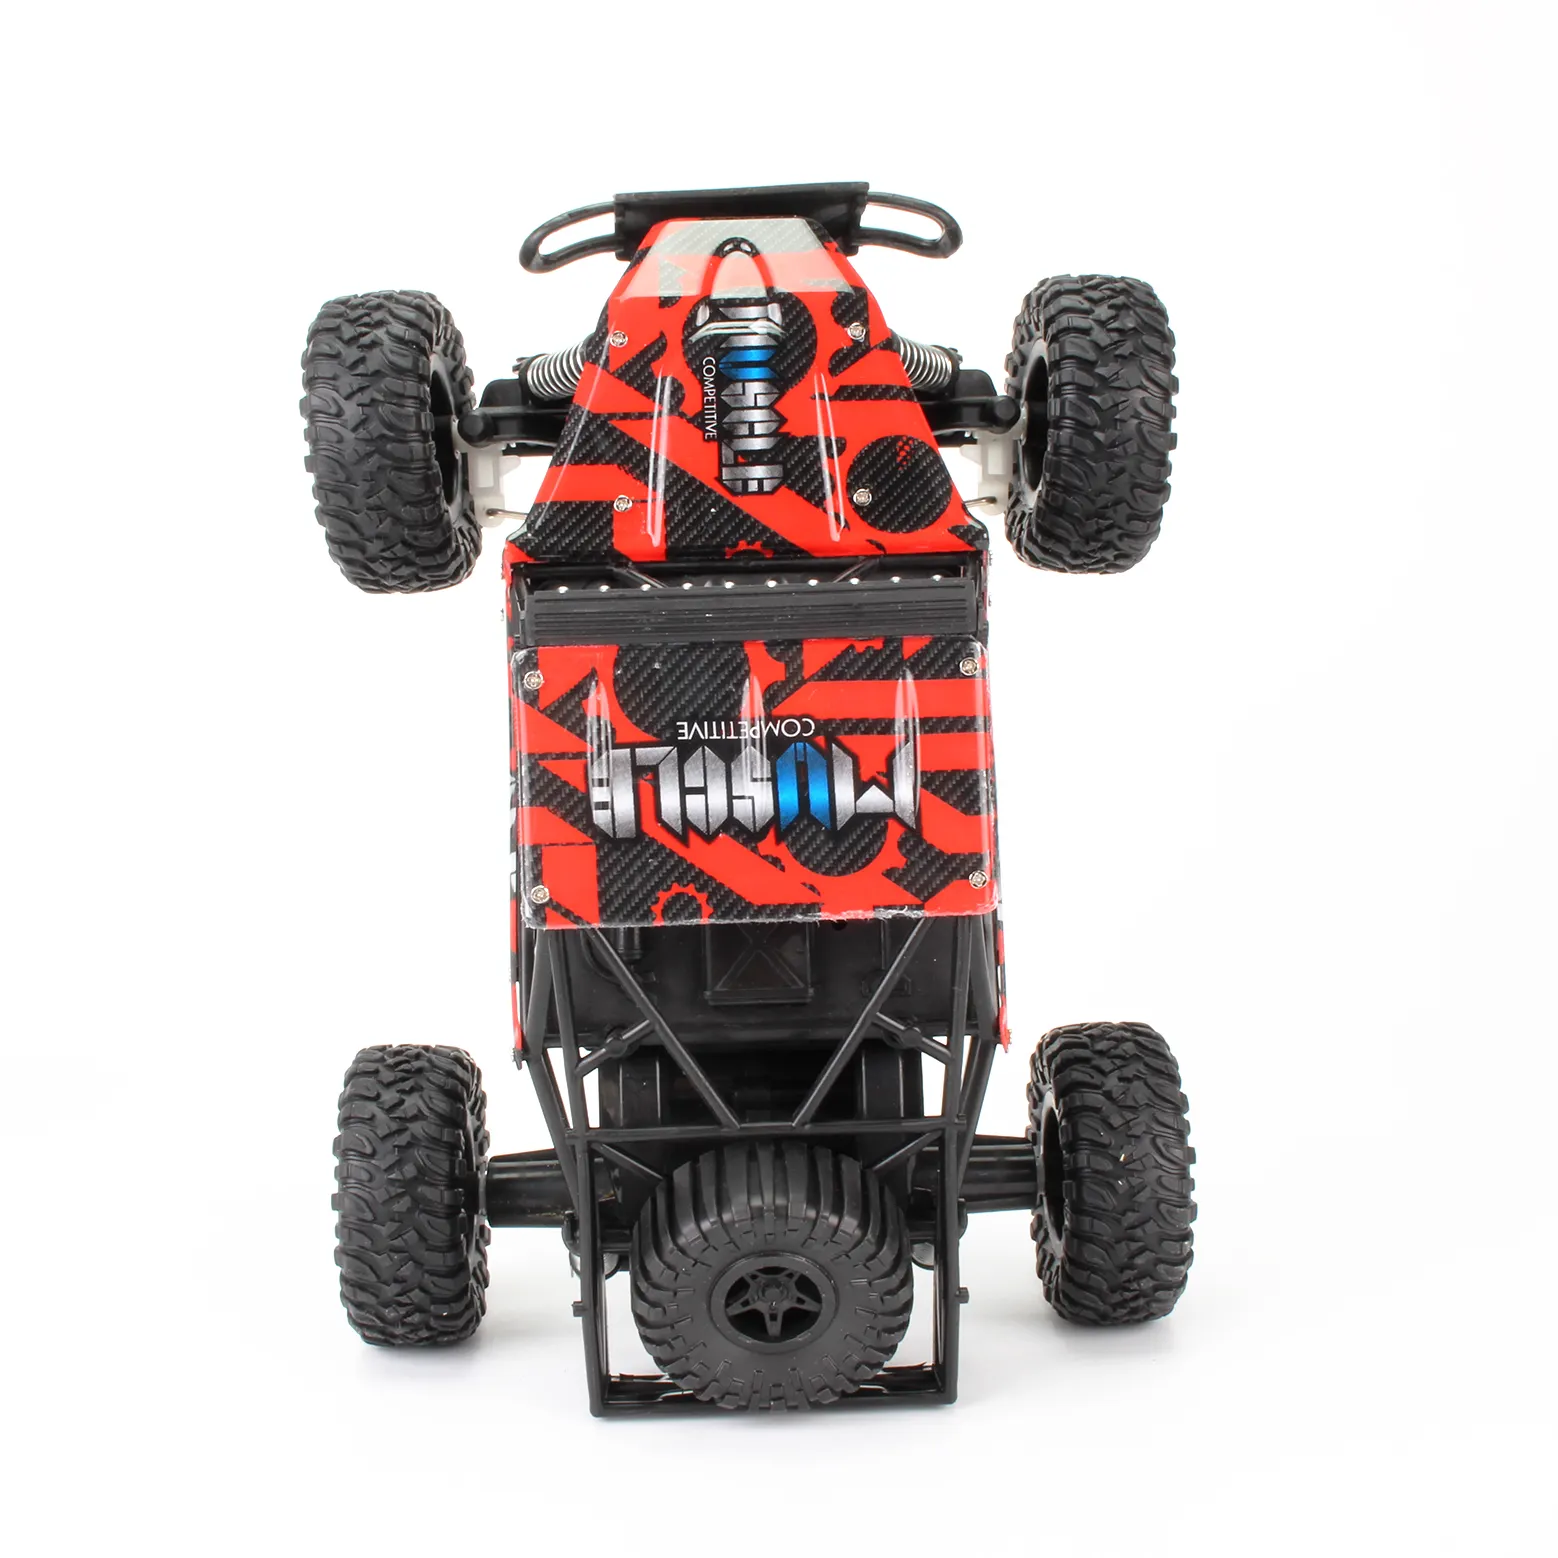 Camoro Best Seller 2.4Ghz Off Road RC Climbing monster trucks Electric Remote Control truck Car for boys adults with high speed